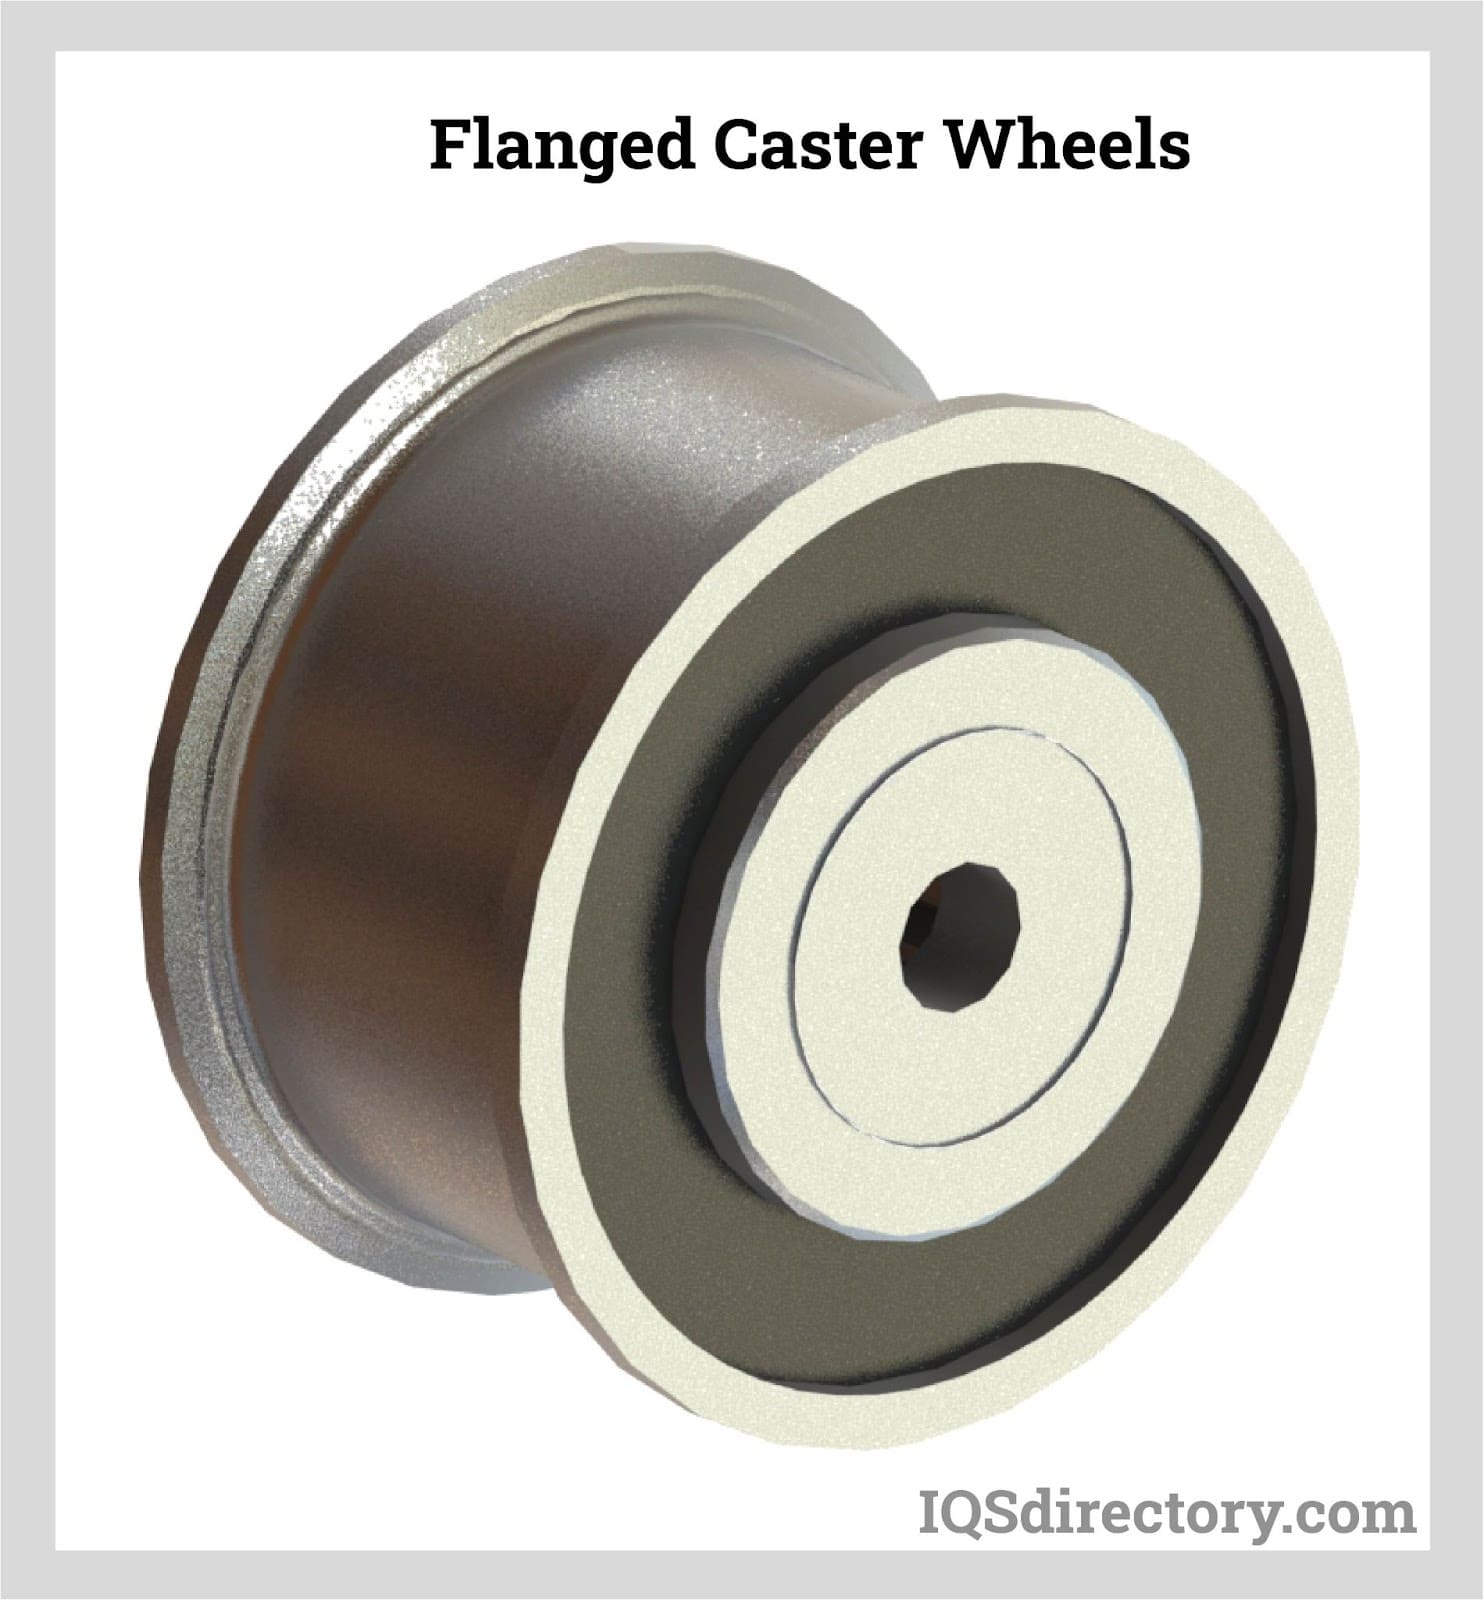 Flanged Caster Wheel